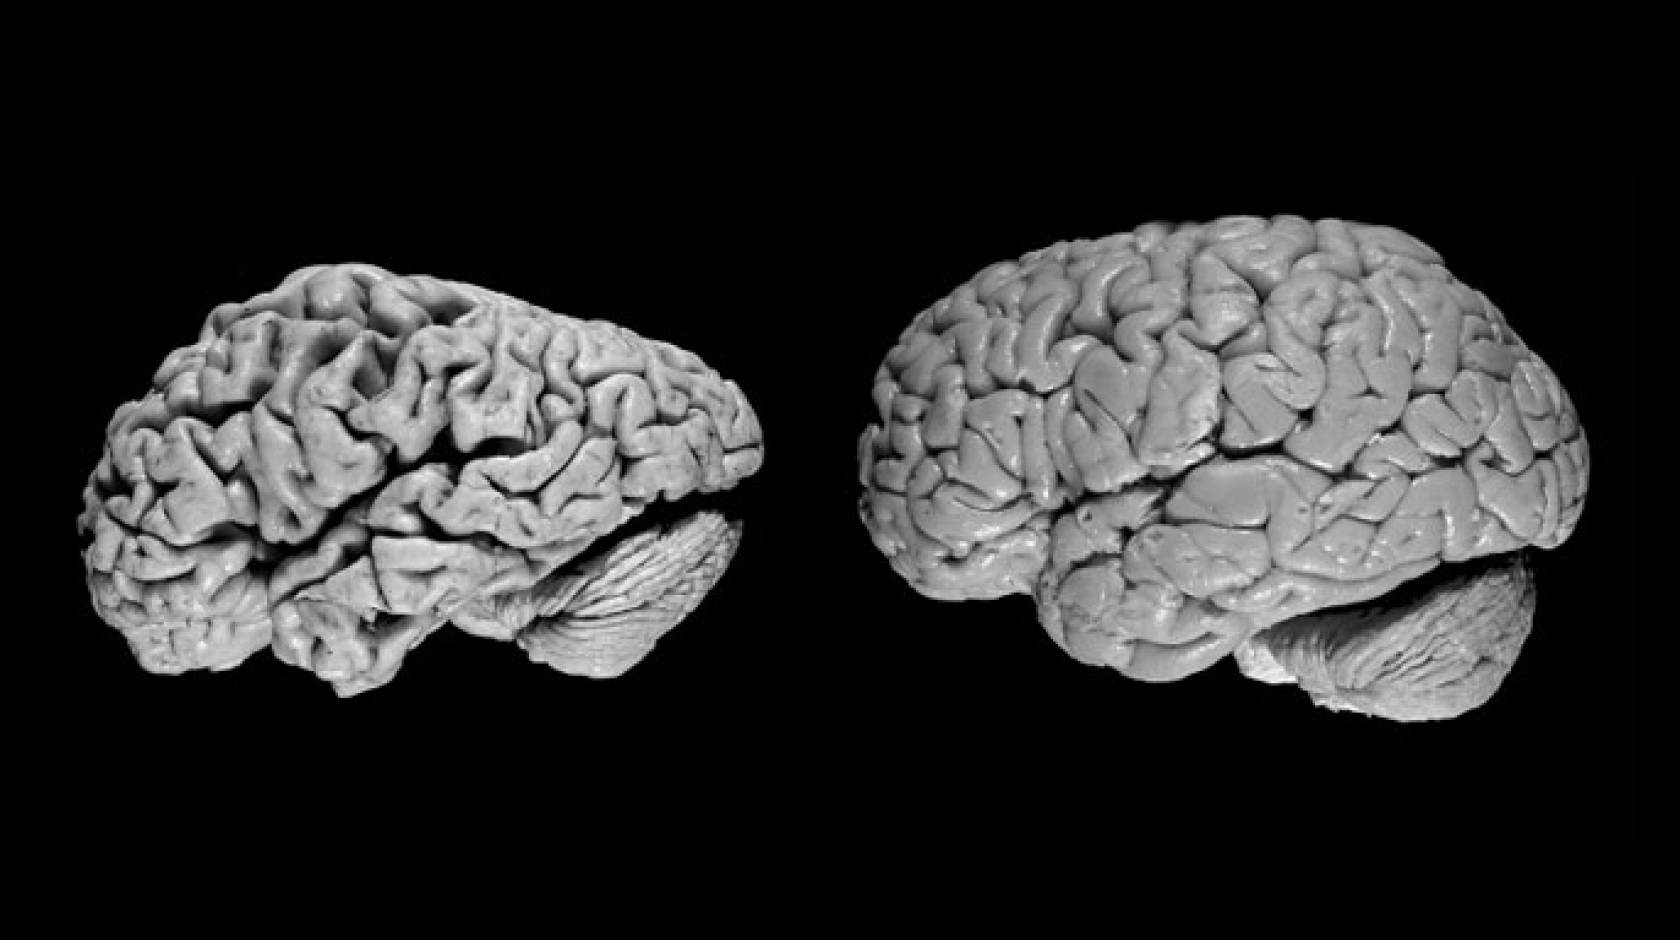 A comparison of two brains